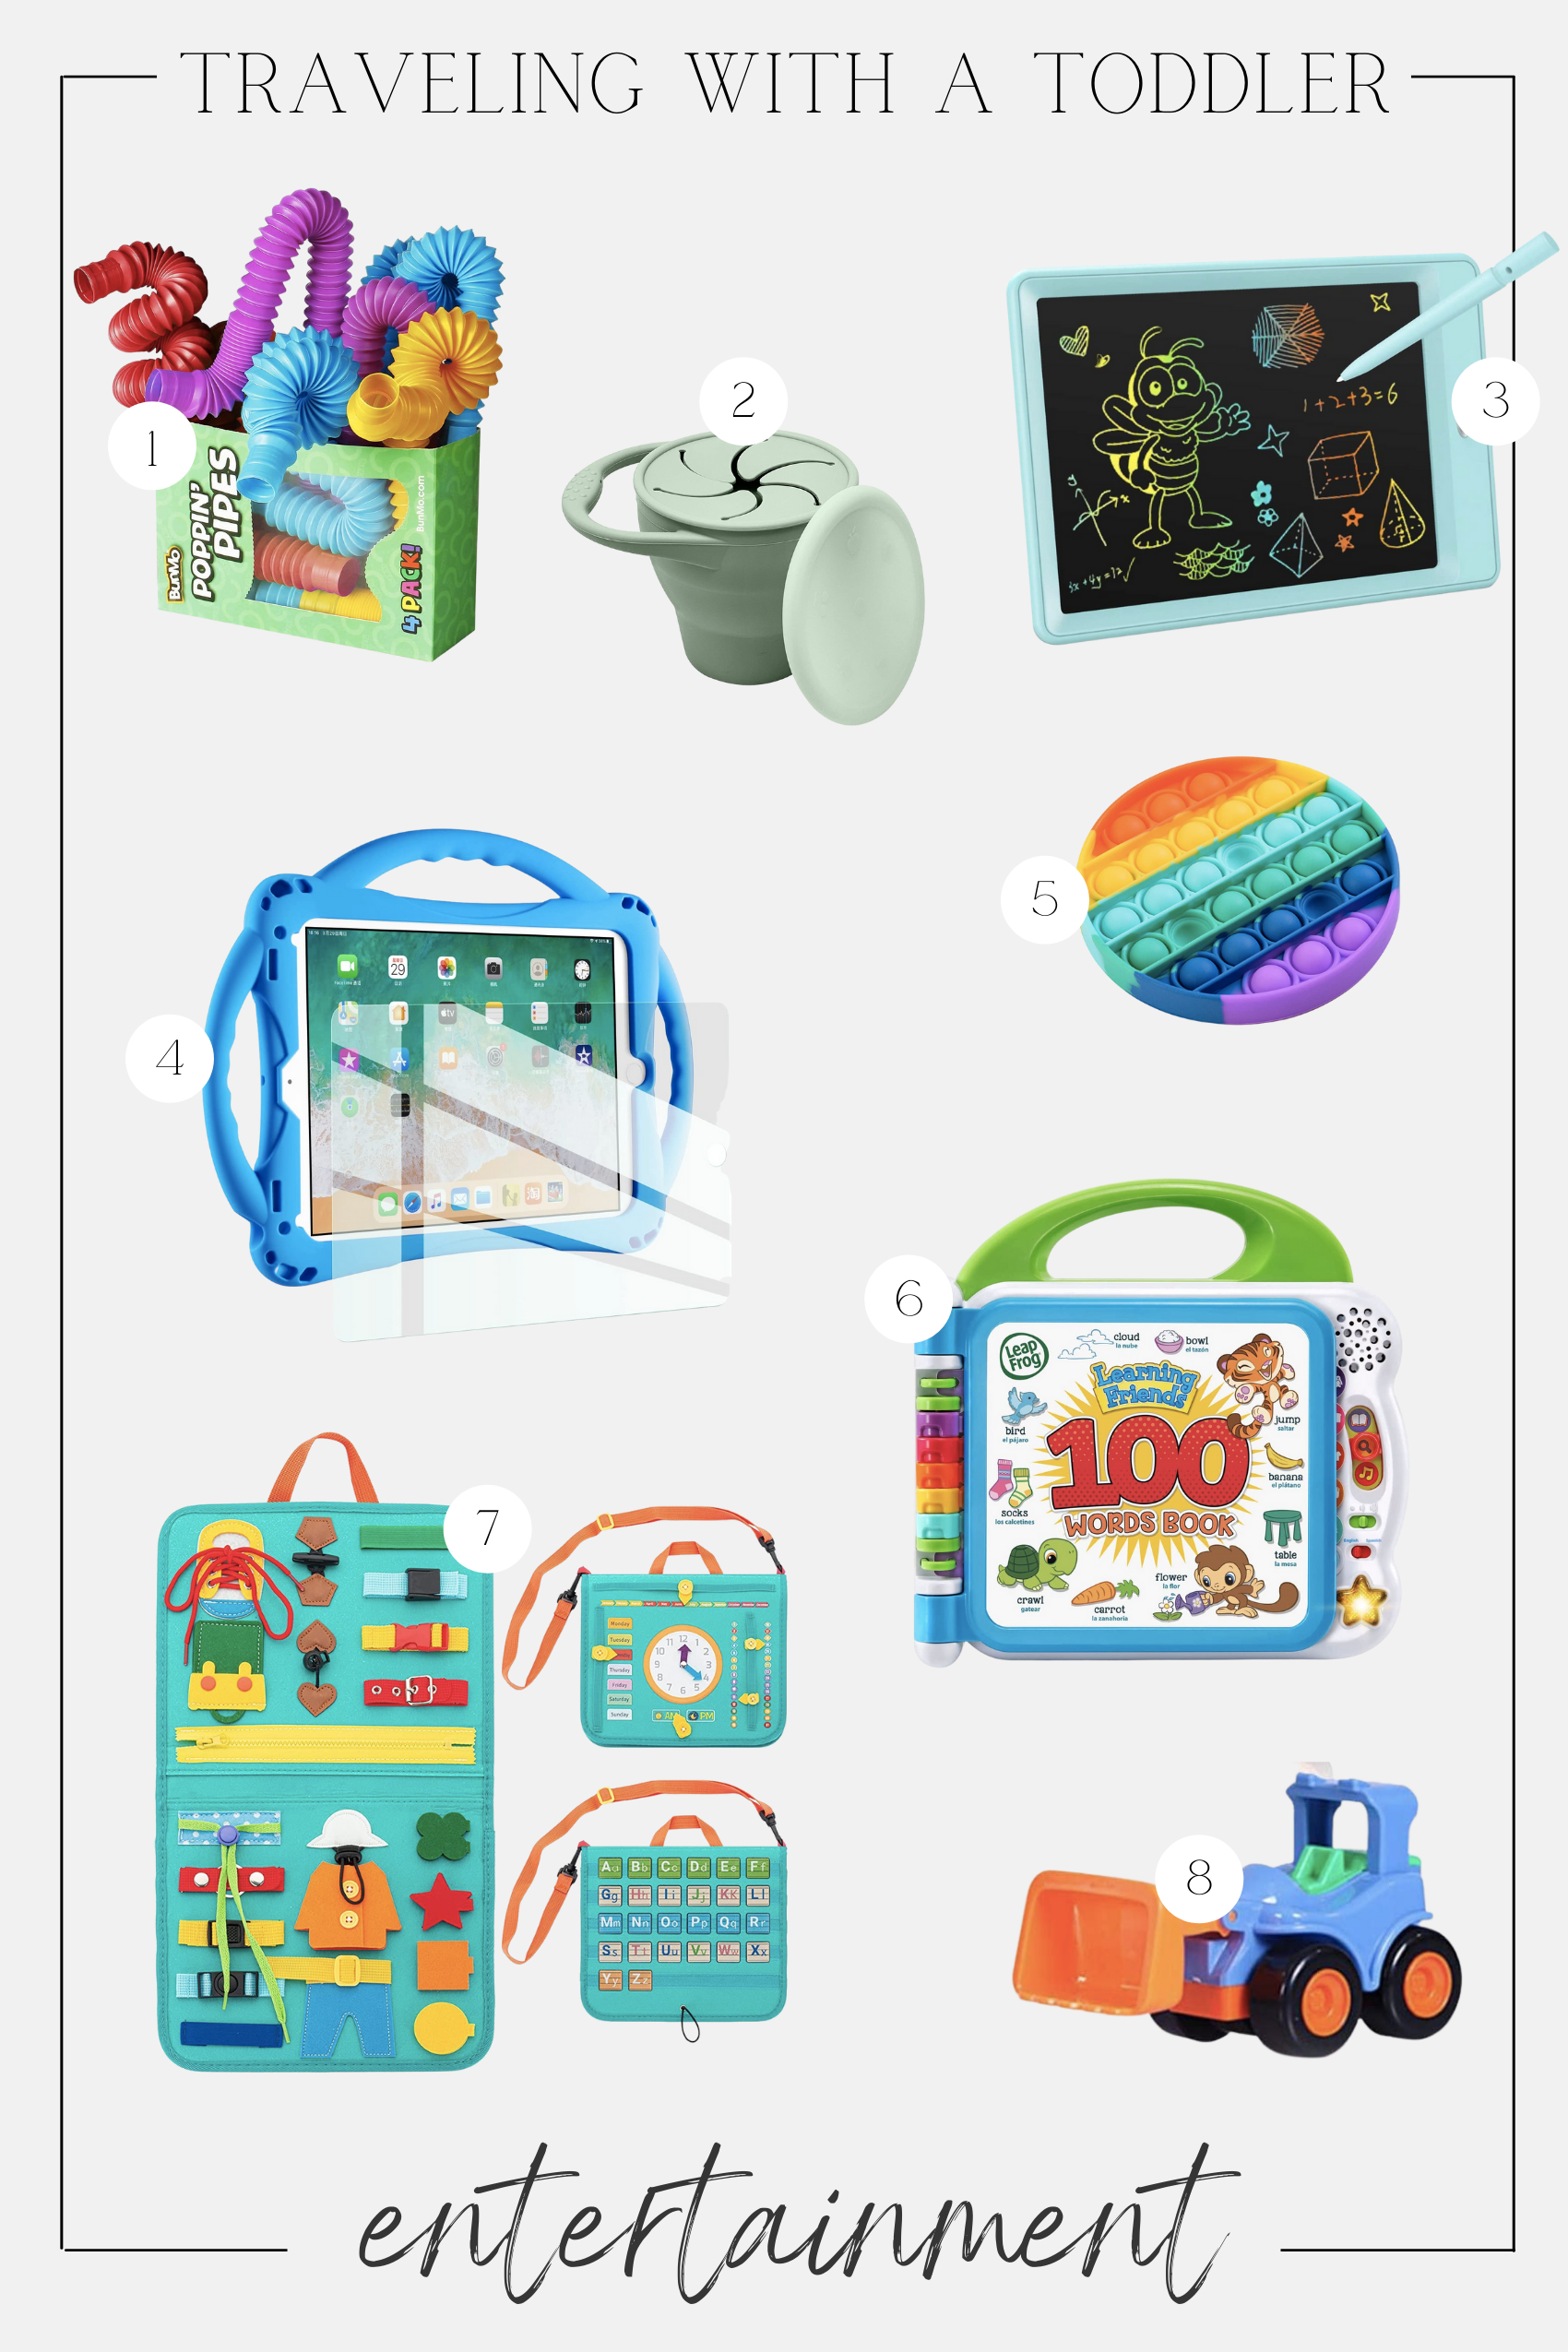 Toys for traveling with a toddler graphic